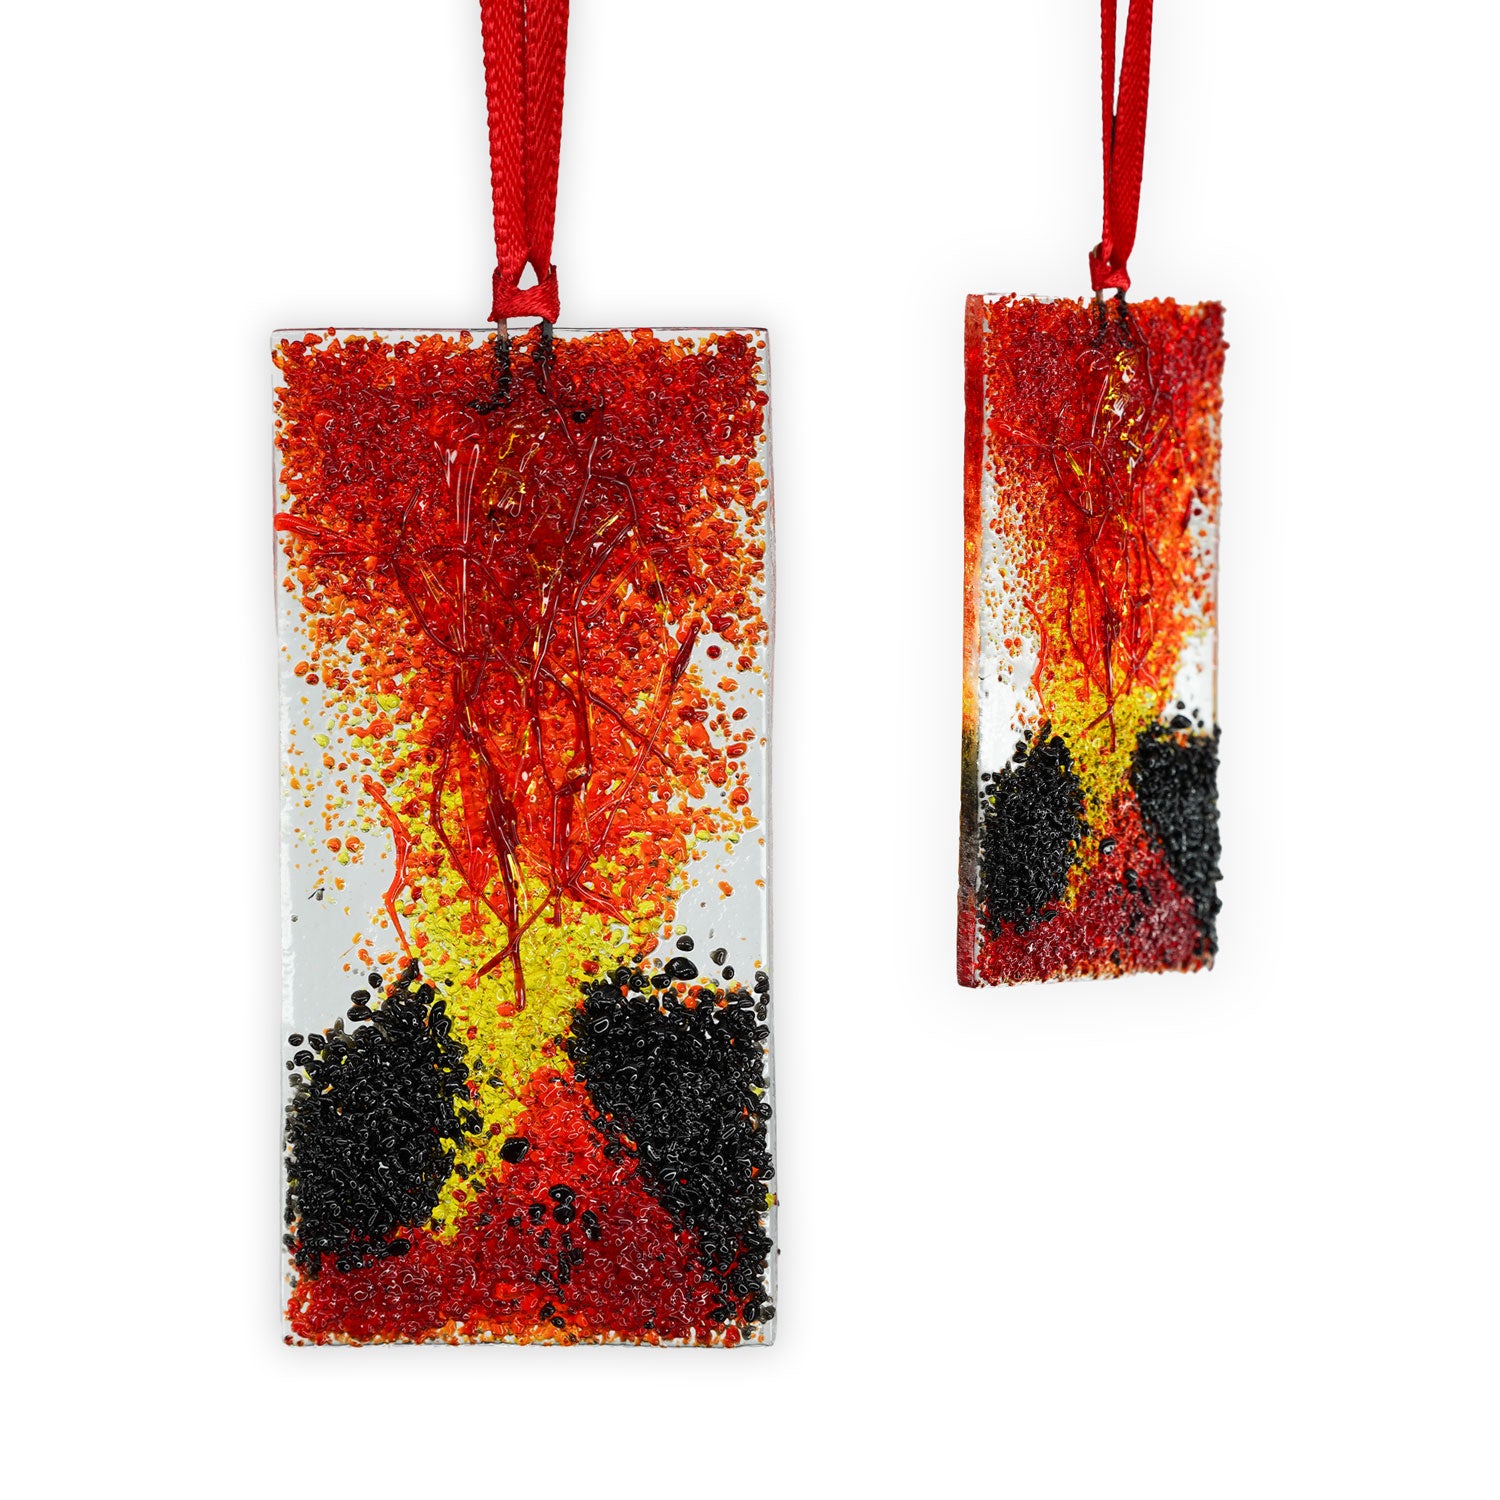 Handmade Stained Glass 3D Ornament - Lava River